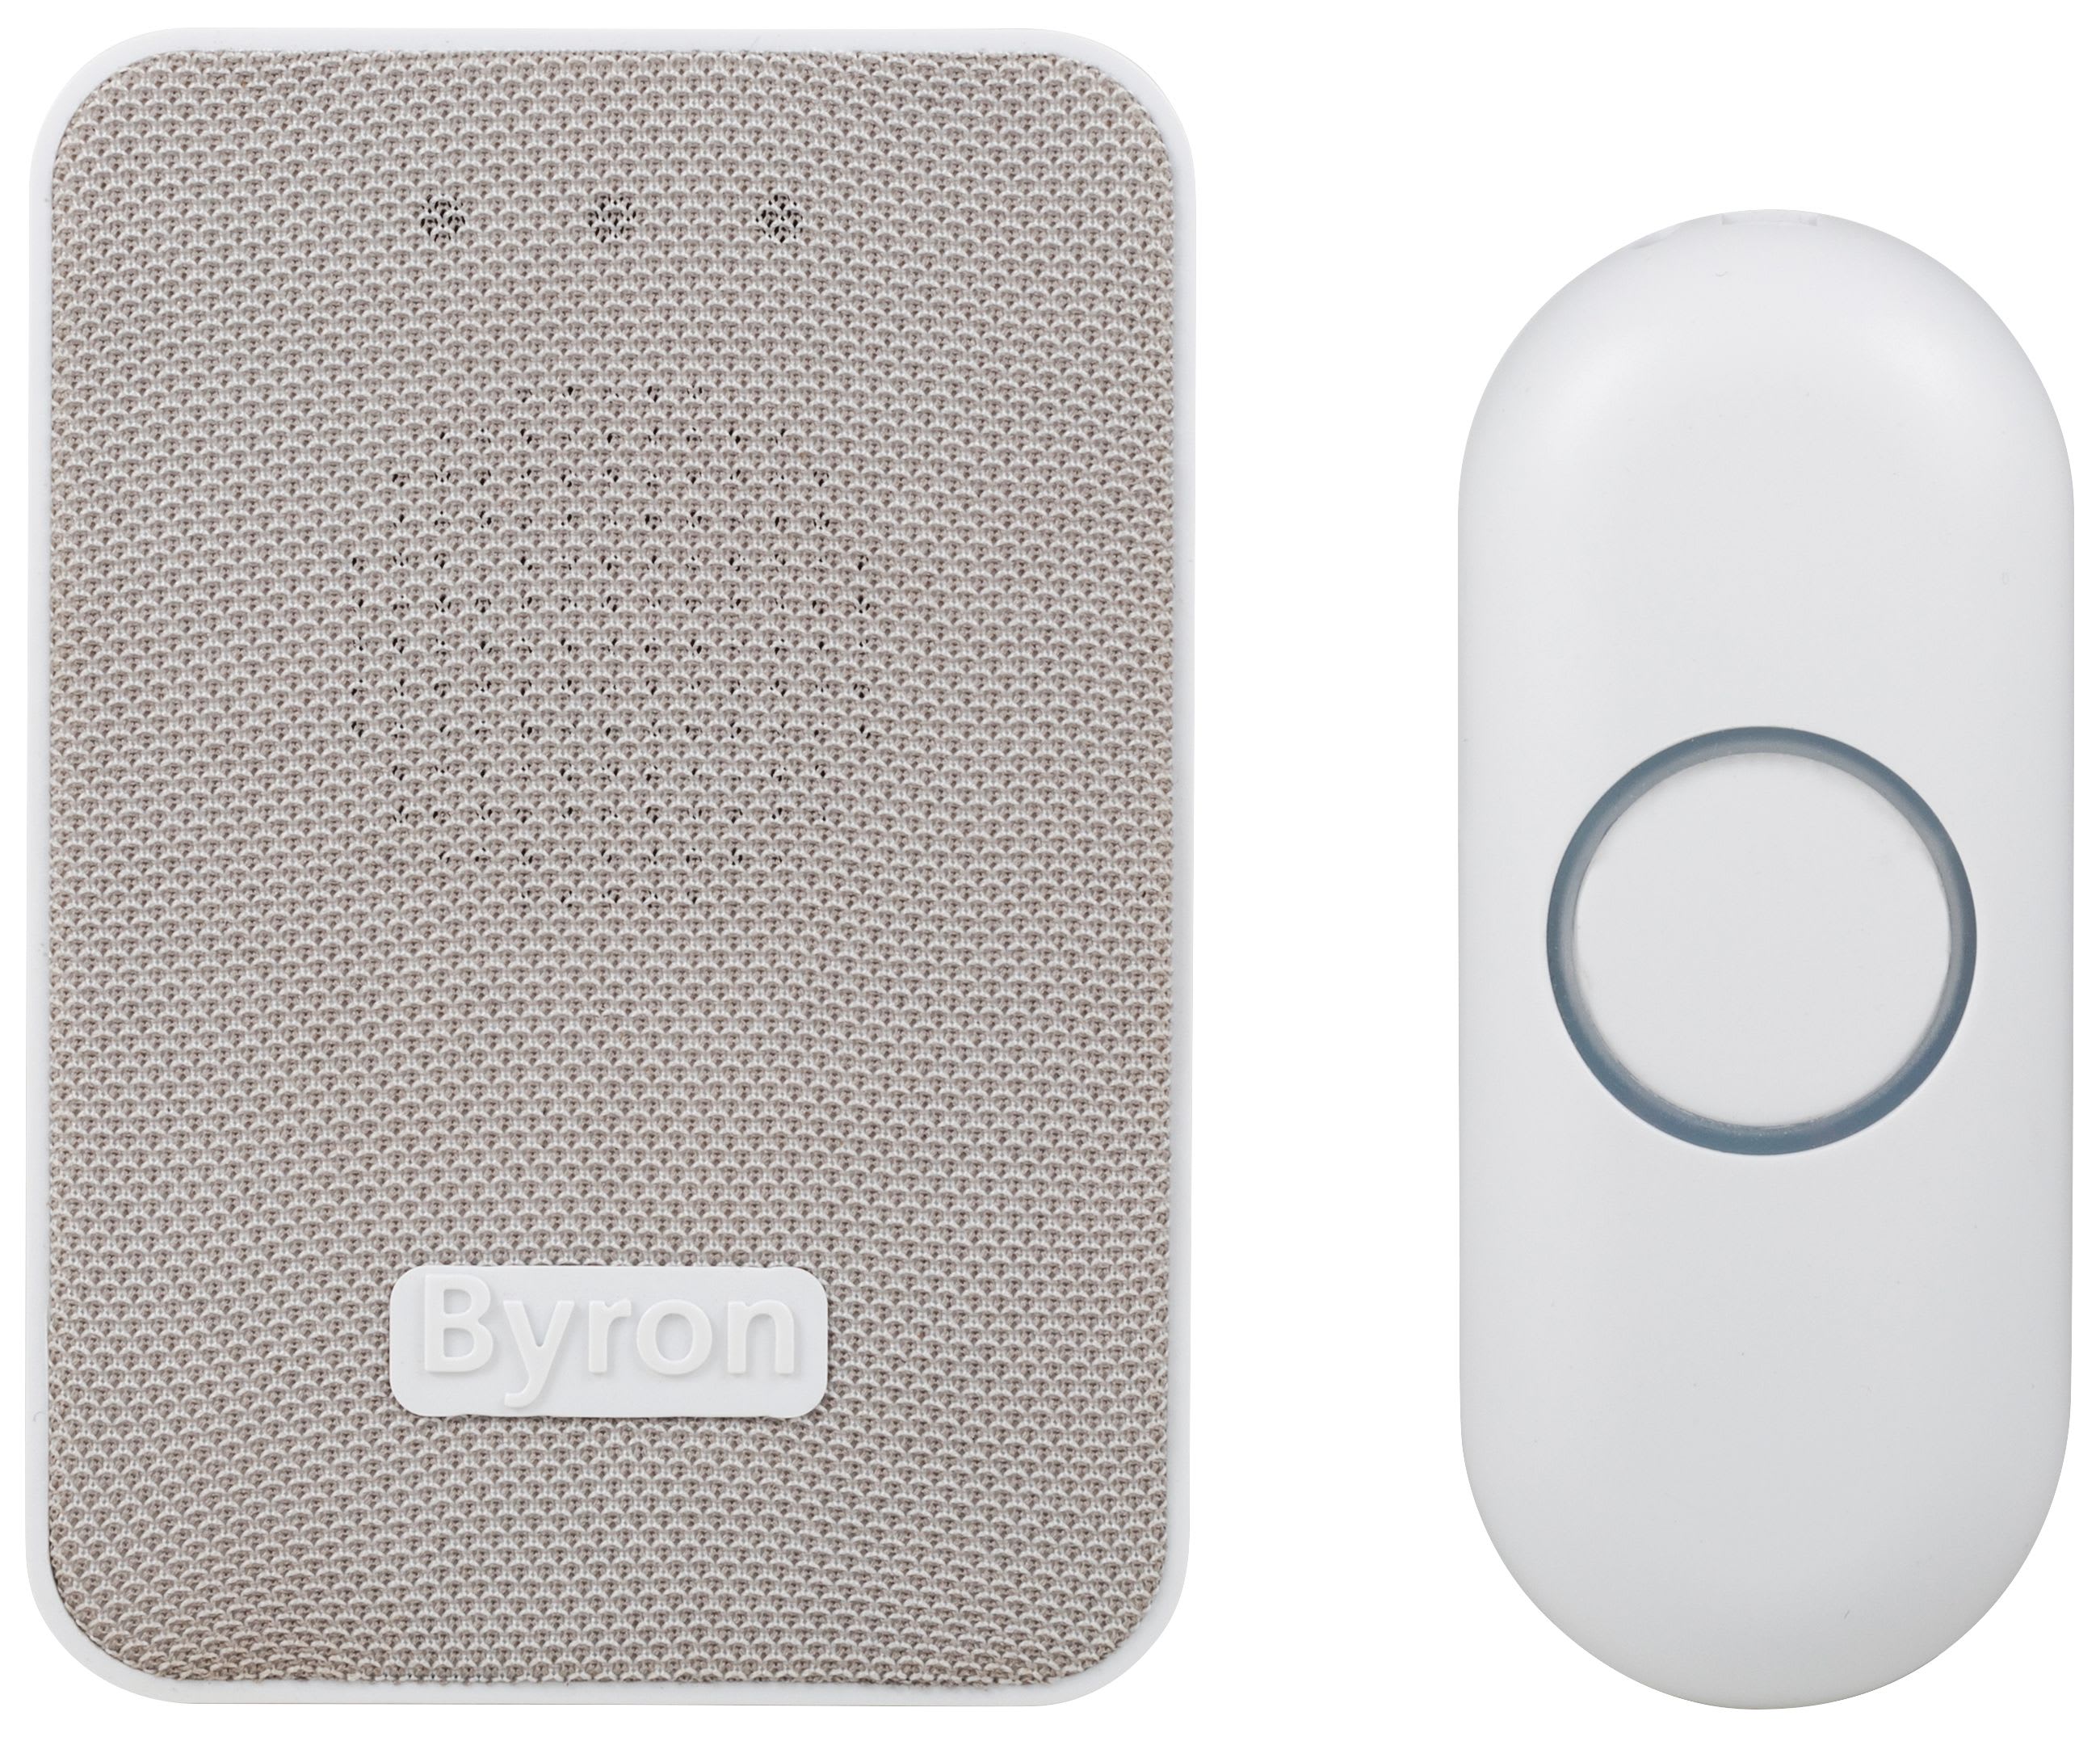 Byron DBY-22322UK Wireless Doorbell with Plug-In Chime -